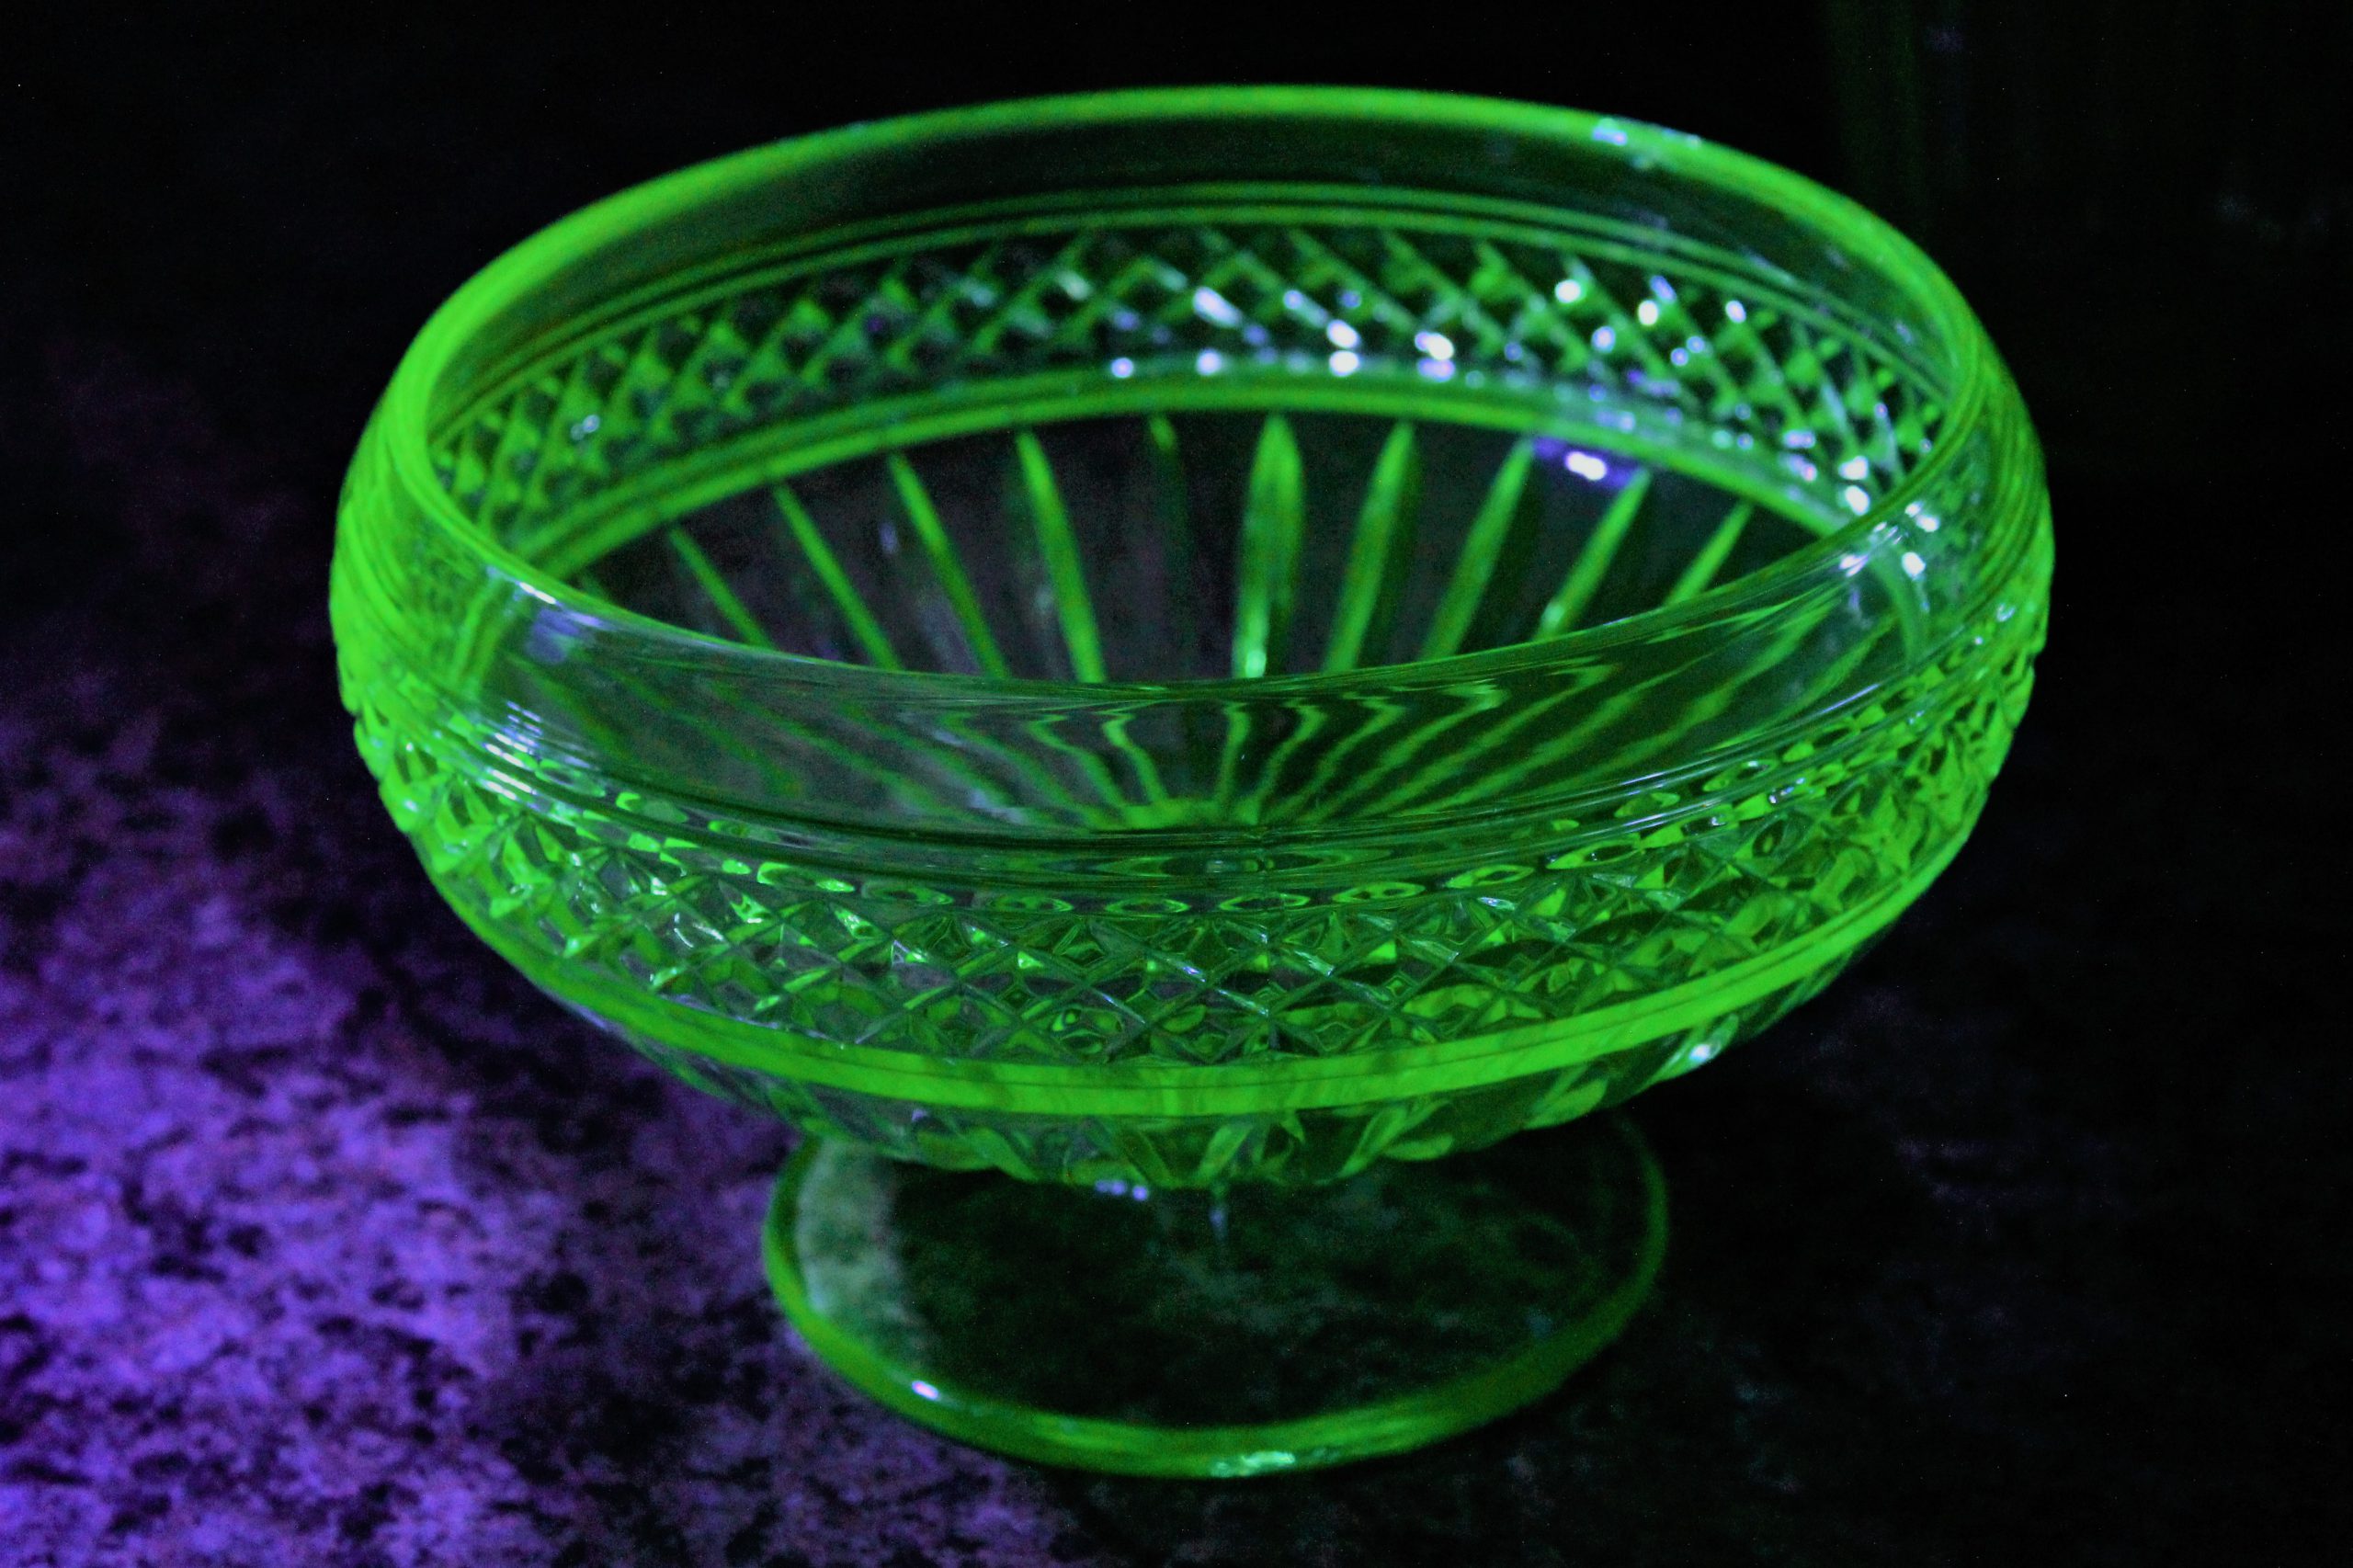 My most radioactive fancy bowl